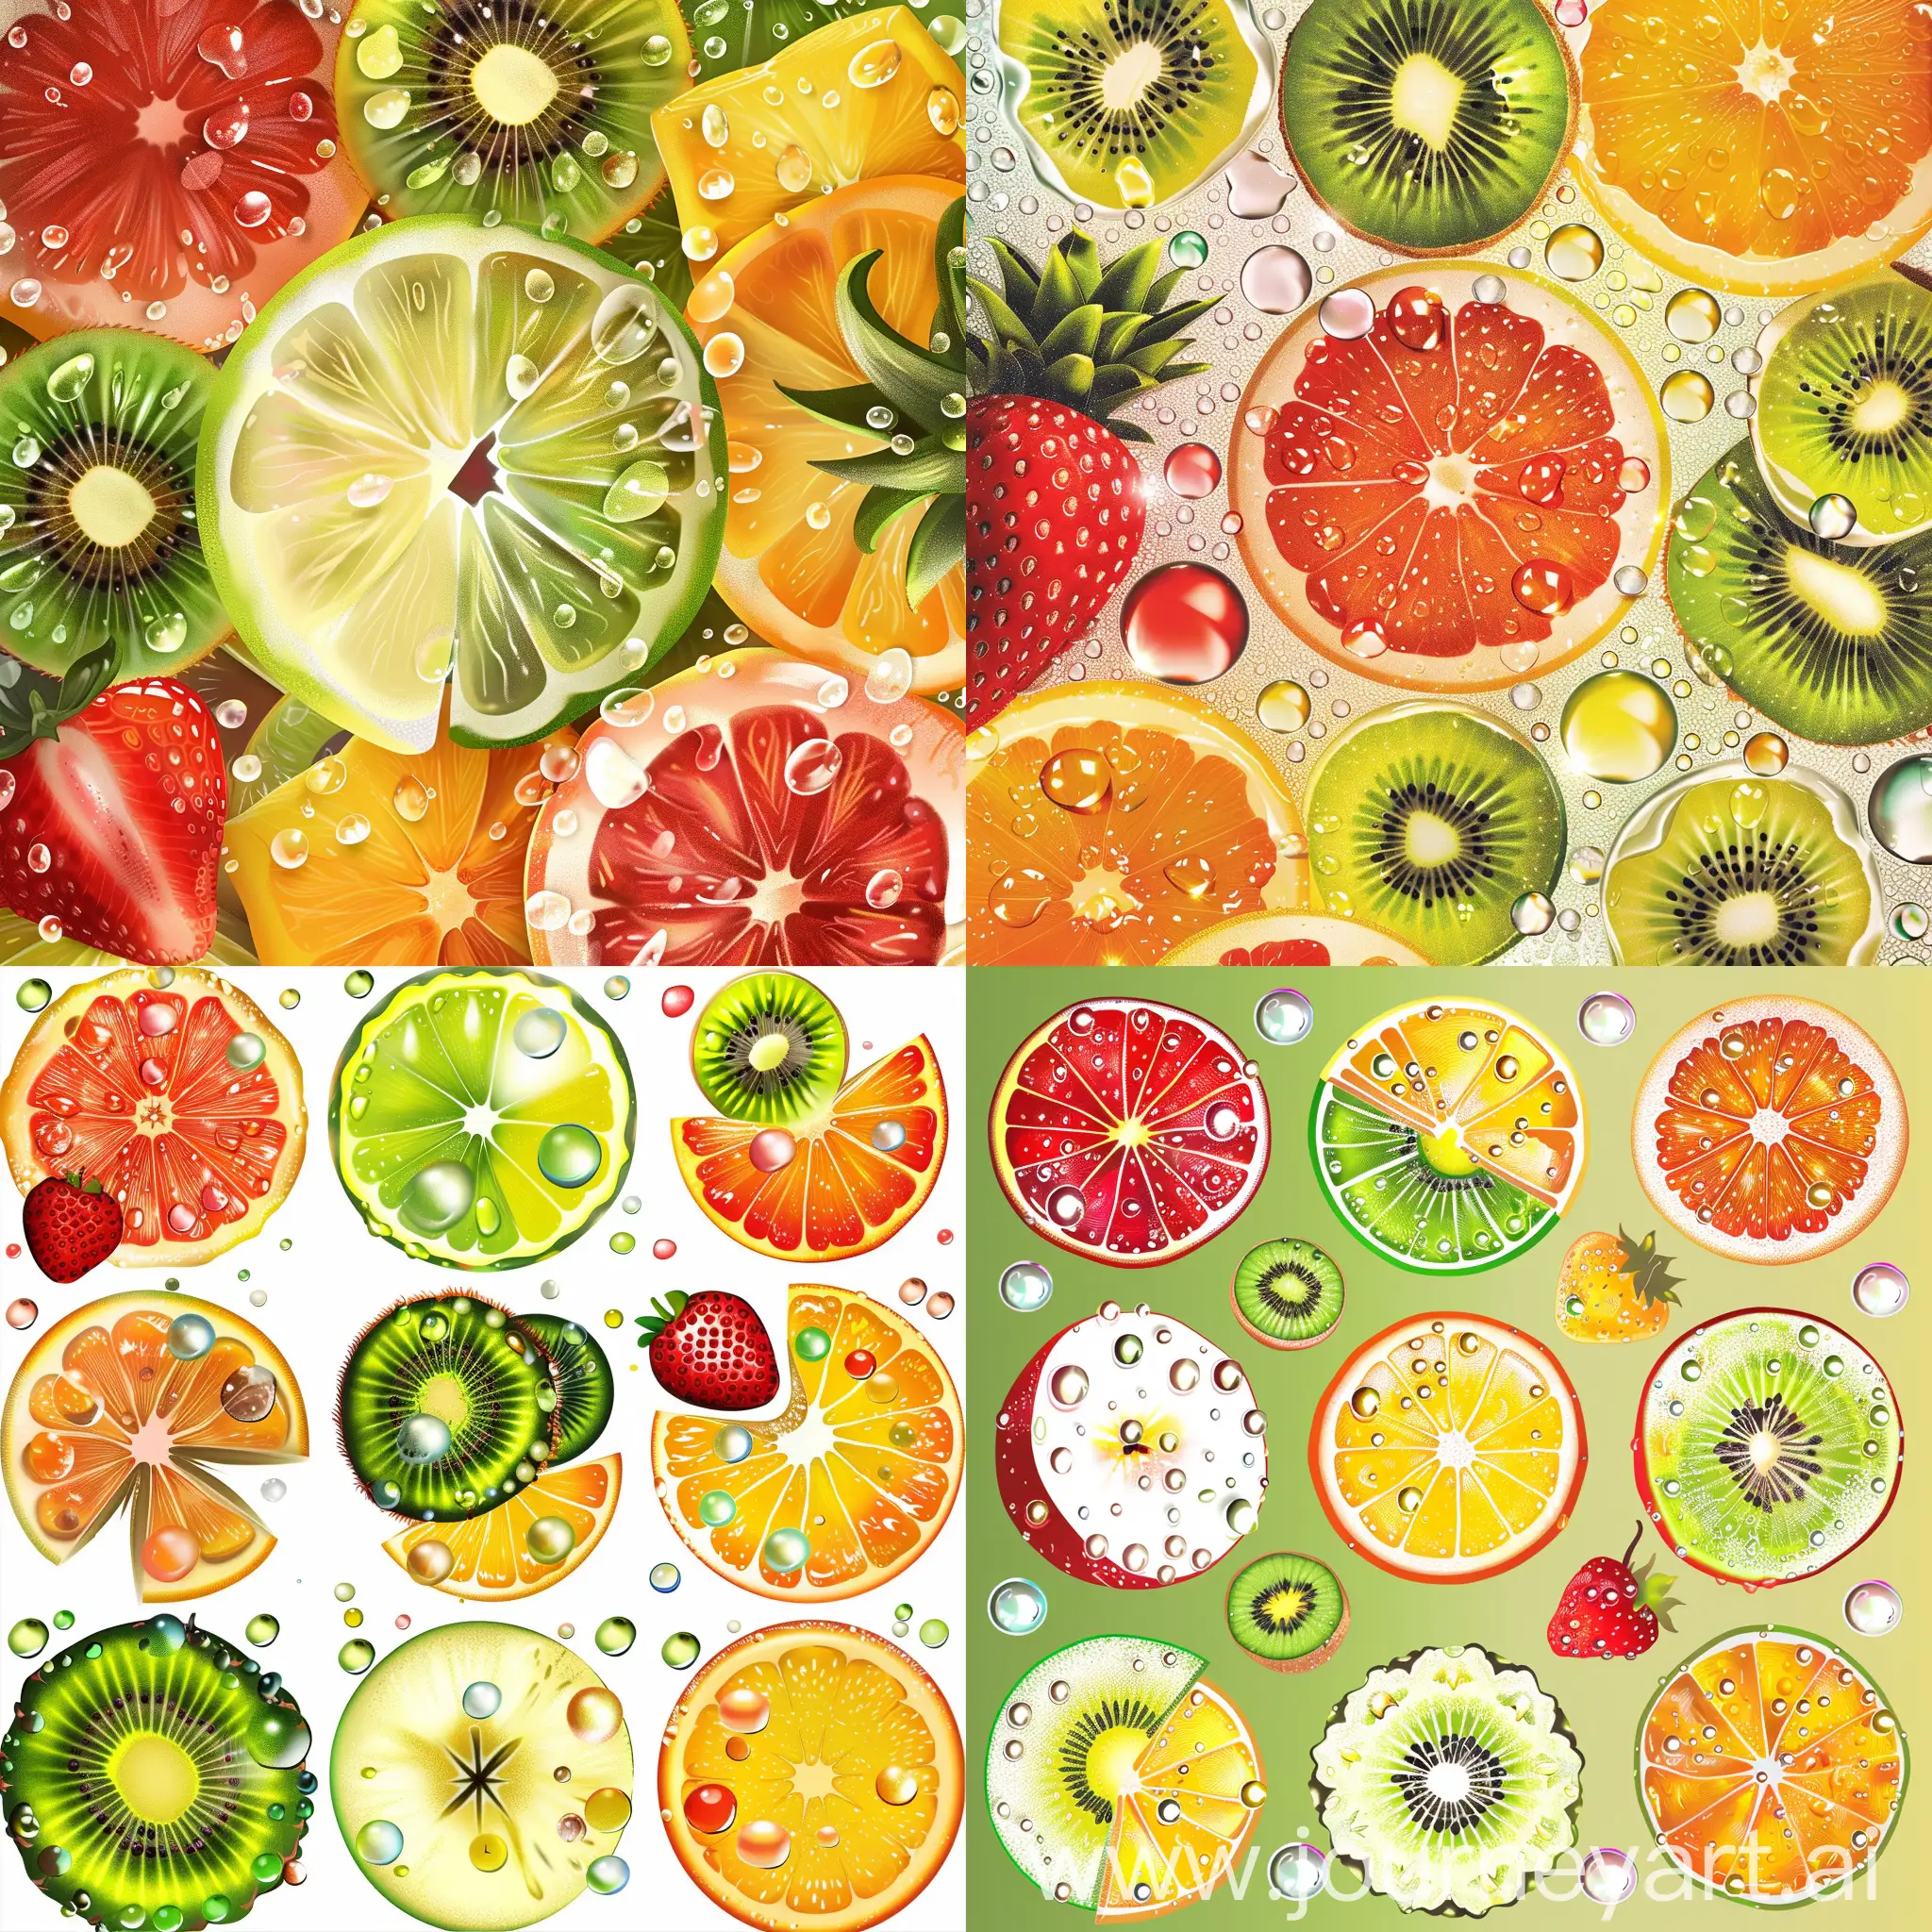 including oranges, apples, kiwis, pineapples, and strawberries. Each fruit slice is depicted with intricate detail to highlight its freshness and juiciness. Water droplets glisten on the surface of the fruits, emphasizing their refreshing nature.  The color palette consists of bright and energetic tones, such as lime green, vibrant orange, sunny yellow, and ripe red. These colors evoke feelings of vitality, health, and appetite appeal.  The font choice is modern and playful, with clean lines and rounded edges, reflecting the lively and approachable nature of the brand.